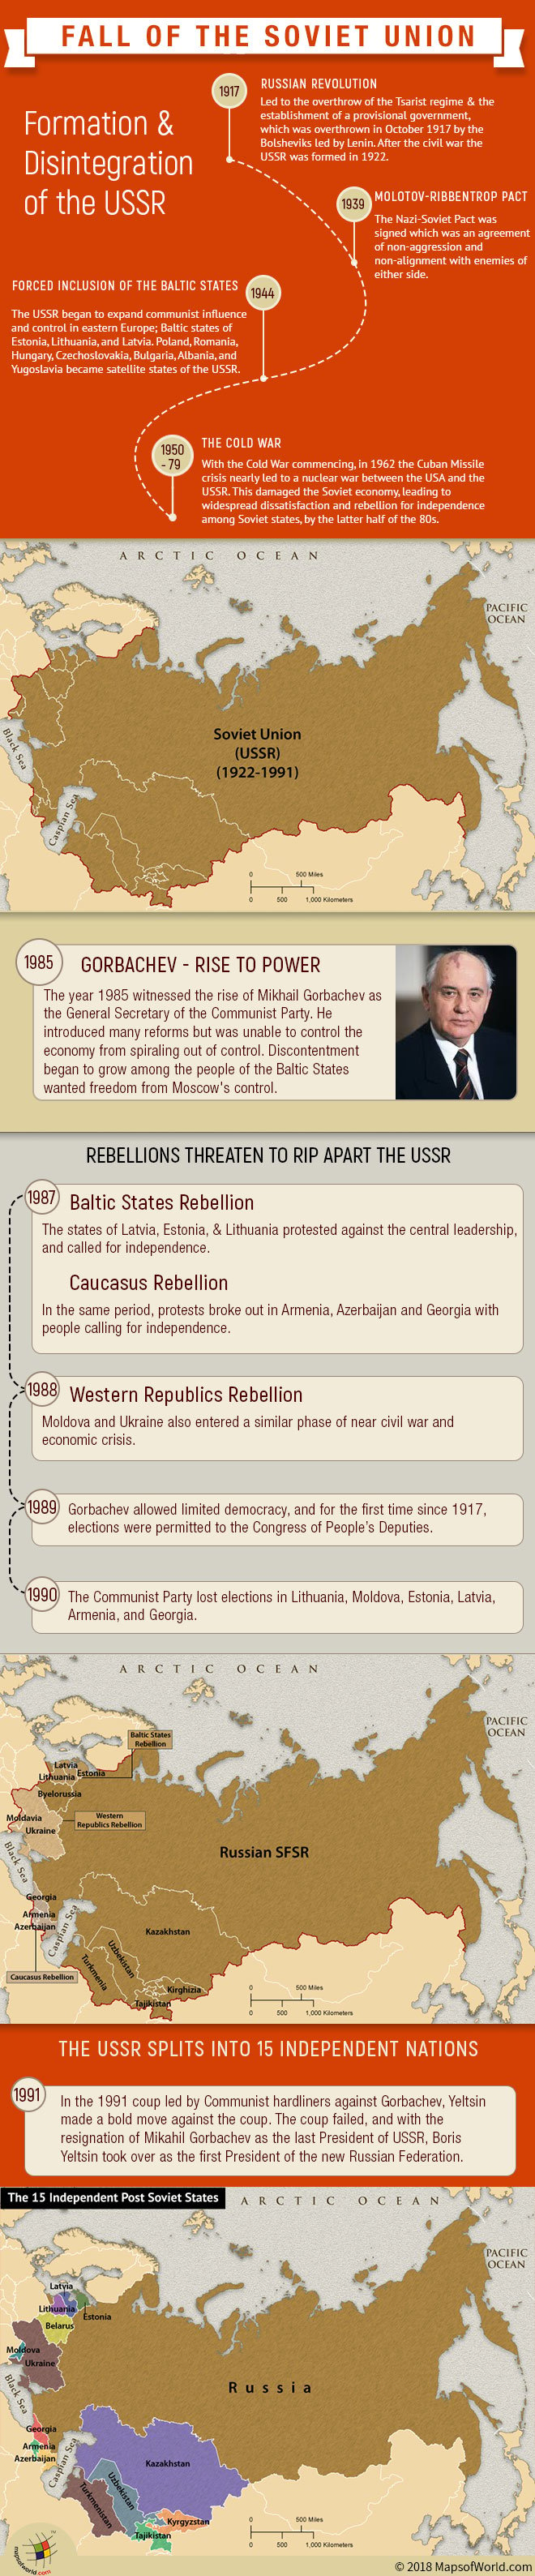 Infographic and maps on the reasons that led to the fall of Soviet Union